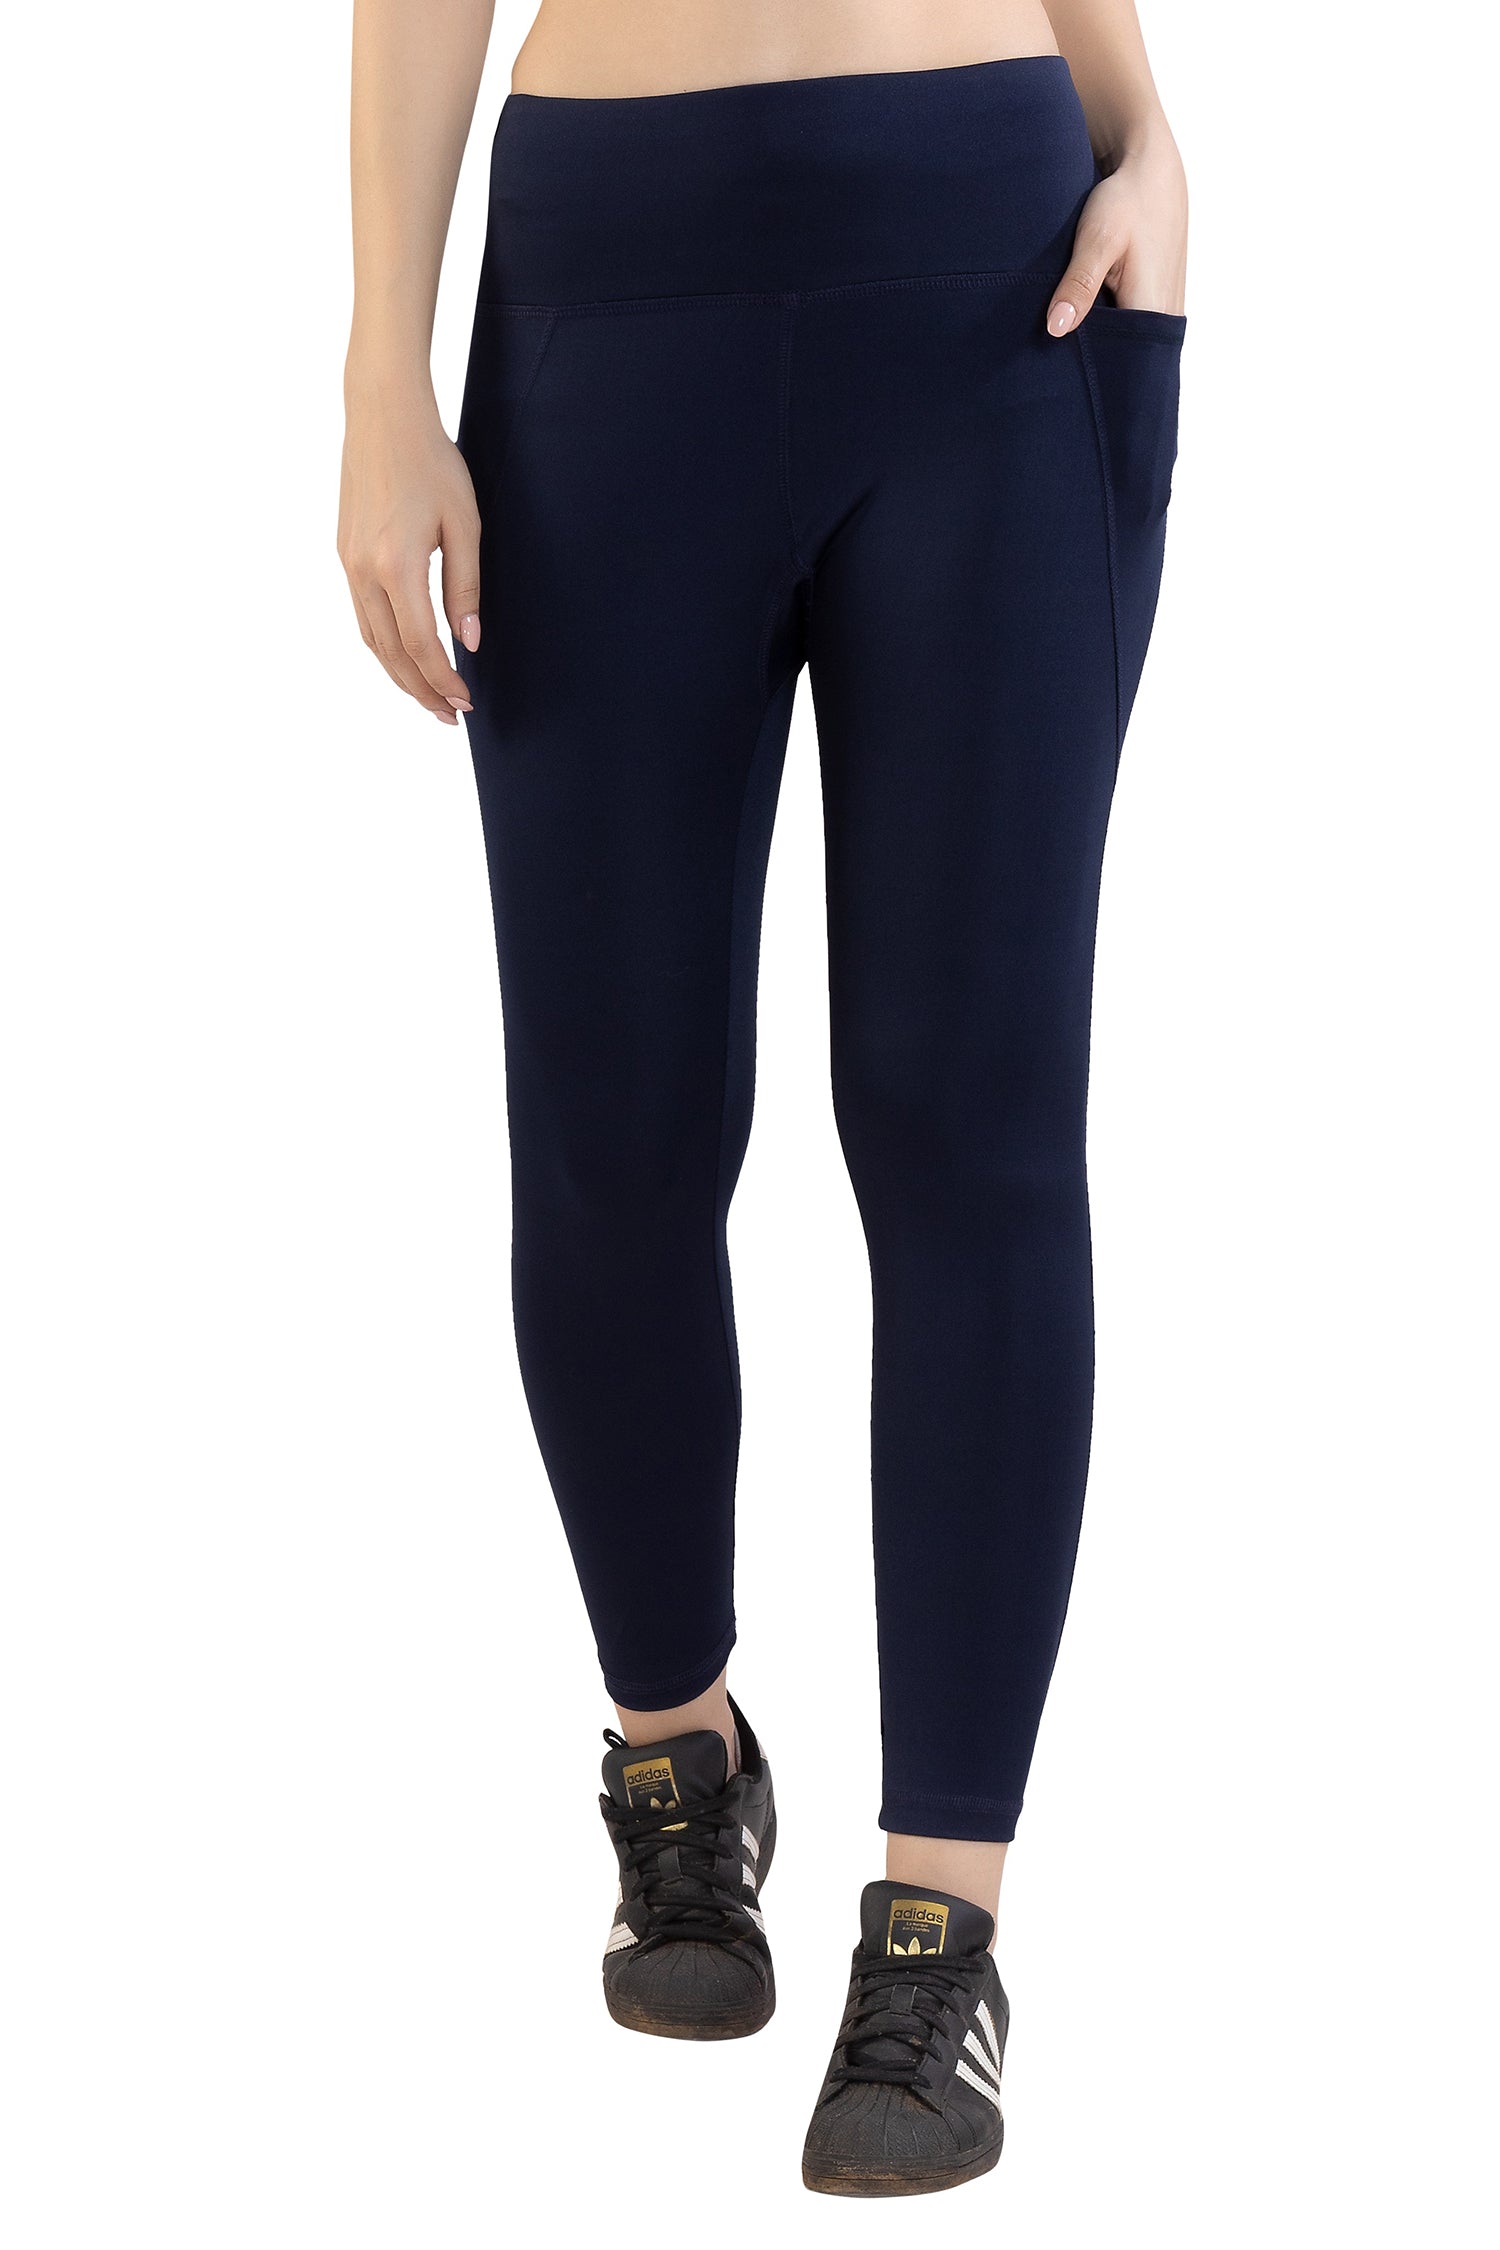 TRASA Active Yoga Pants for Women's Gym High Waist with 3 Pockets- Navy Blue